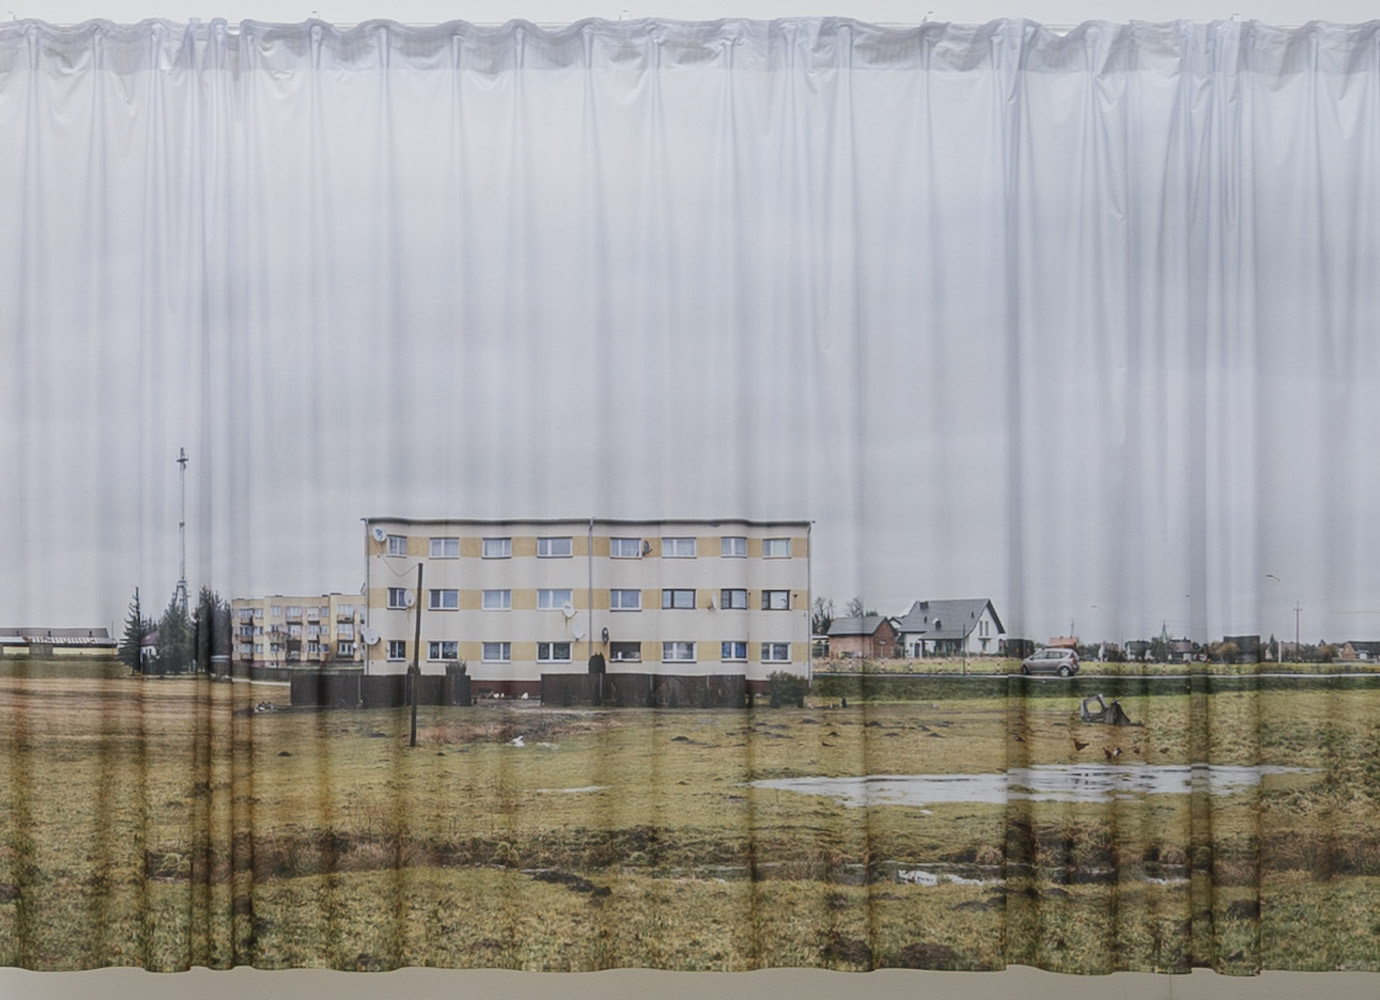 Those who leave and those who stay: Romanian migration under spotlight at the Venice Biennale